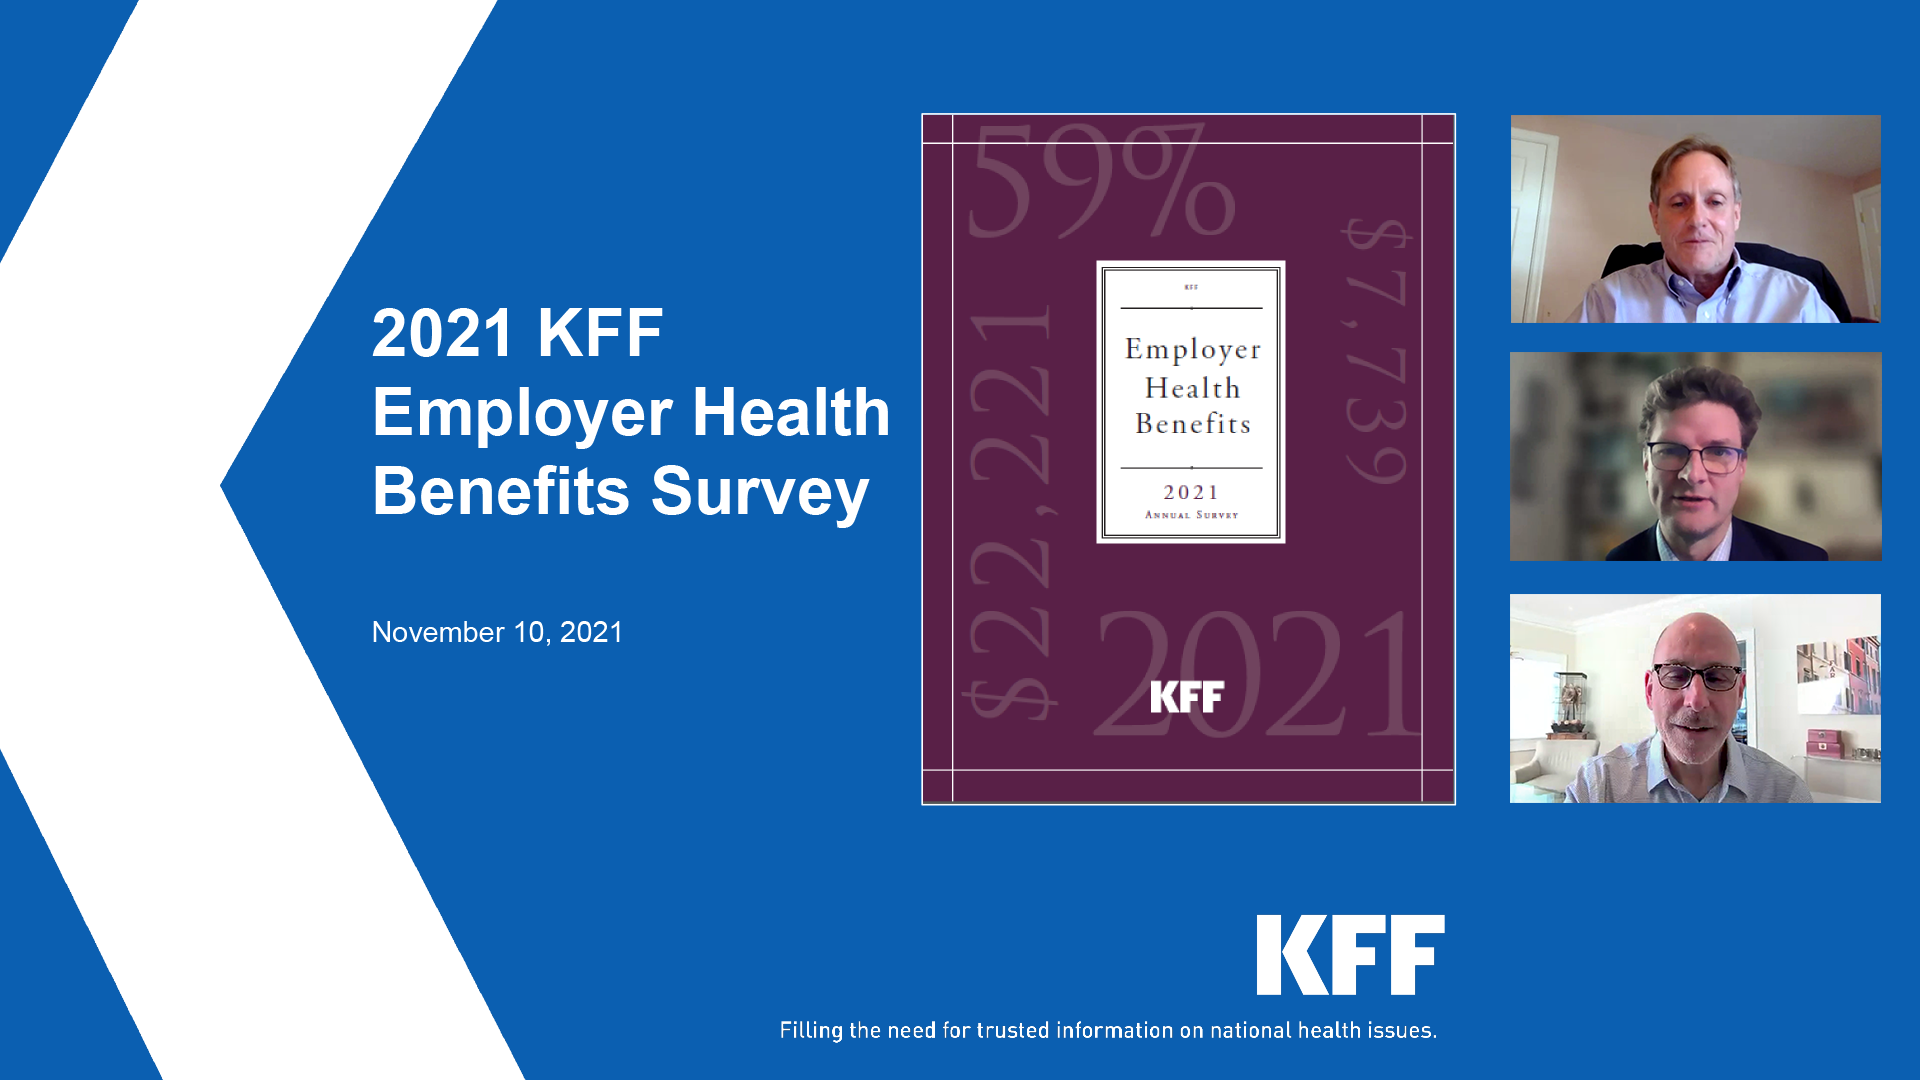 Nov. 10 Web Briefing to Release the 2021 Employer Health Benefits